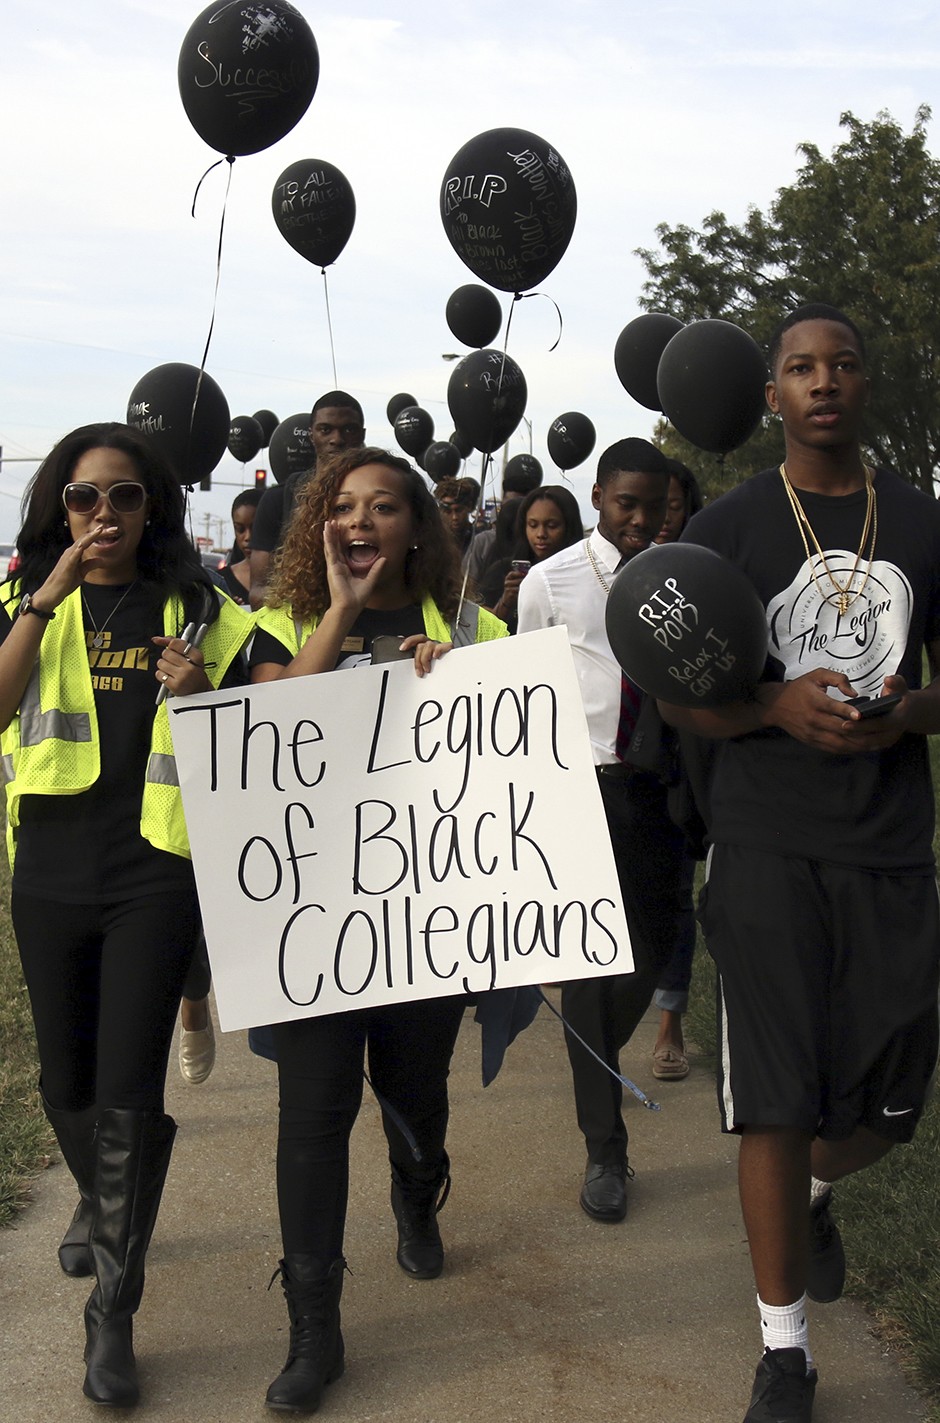 Legion of Black Collegians marching down the street.